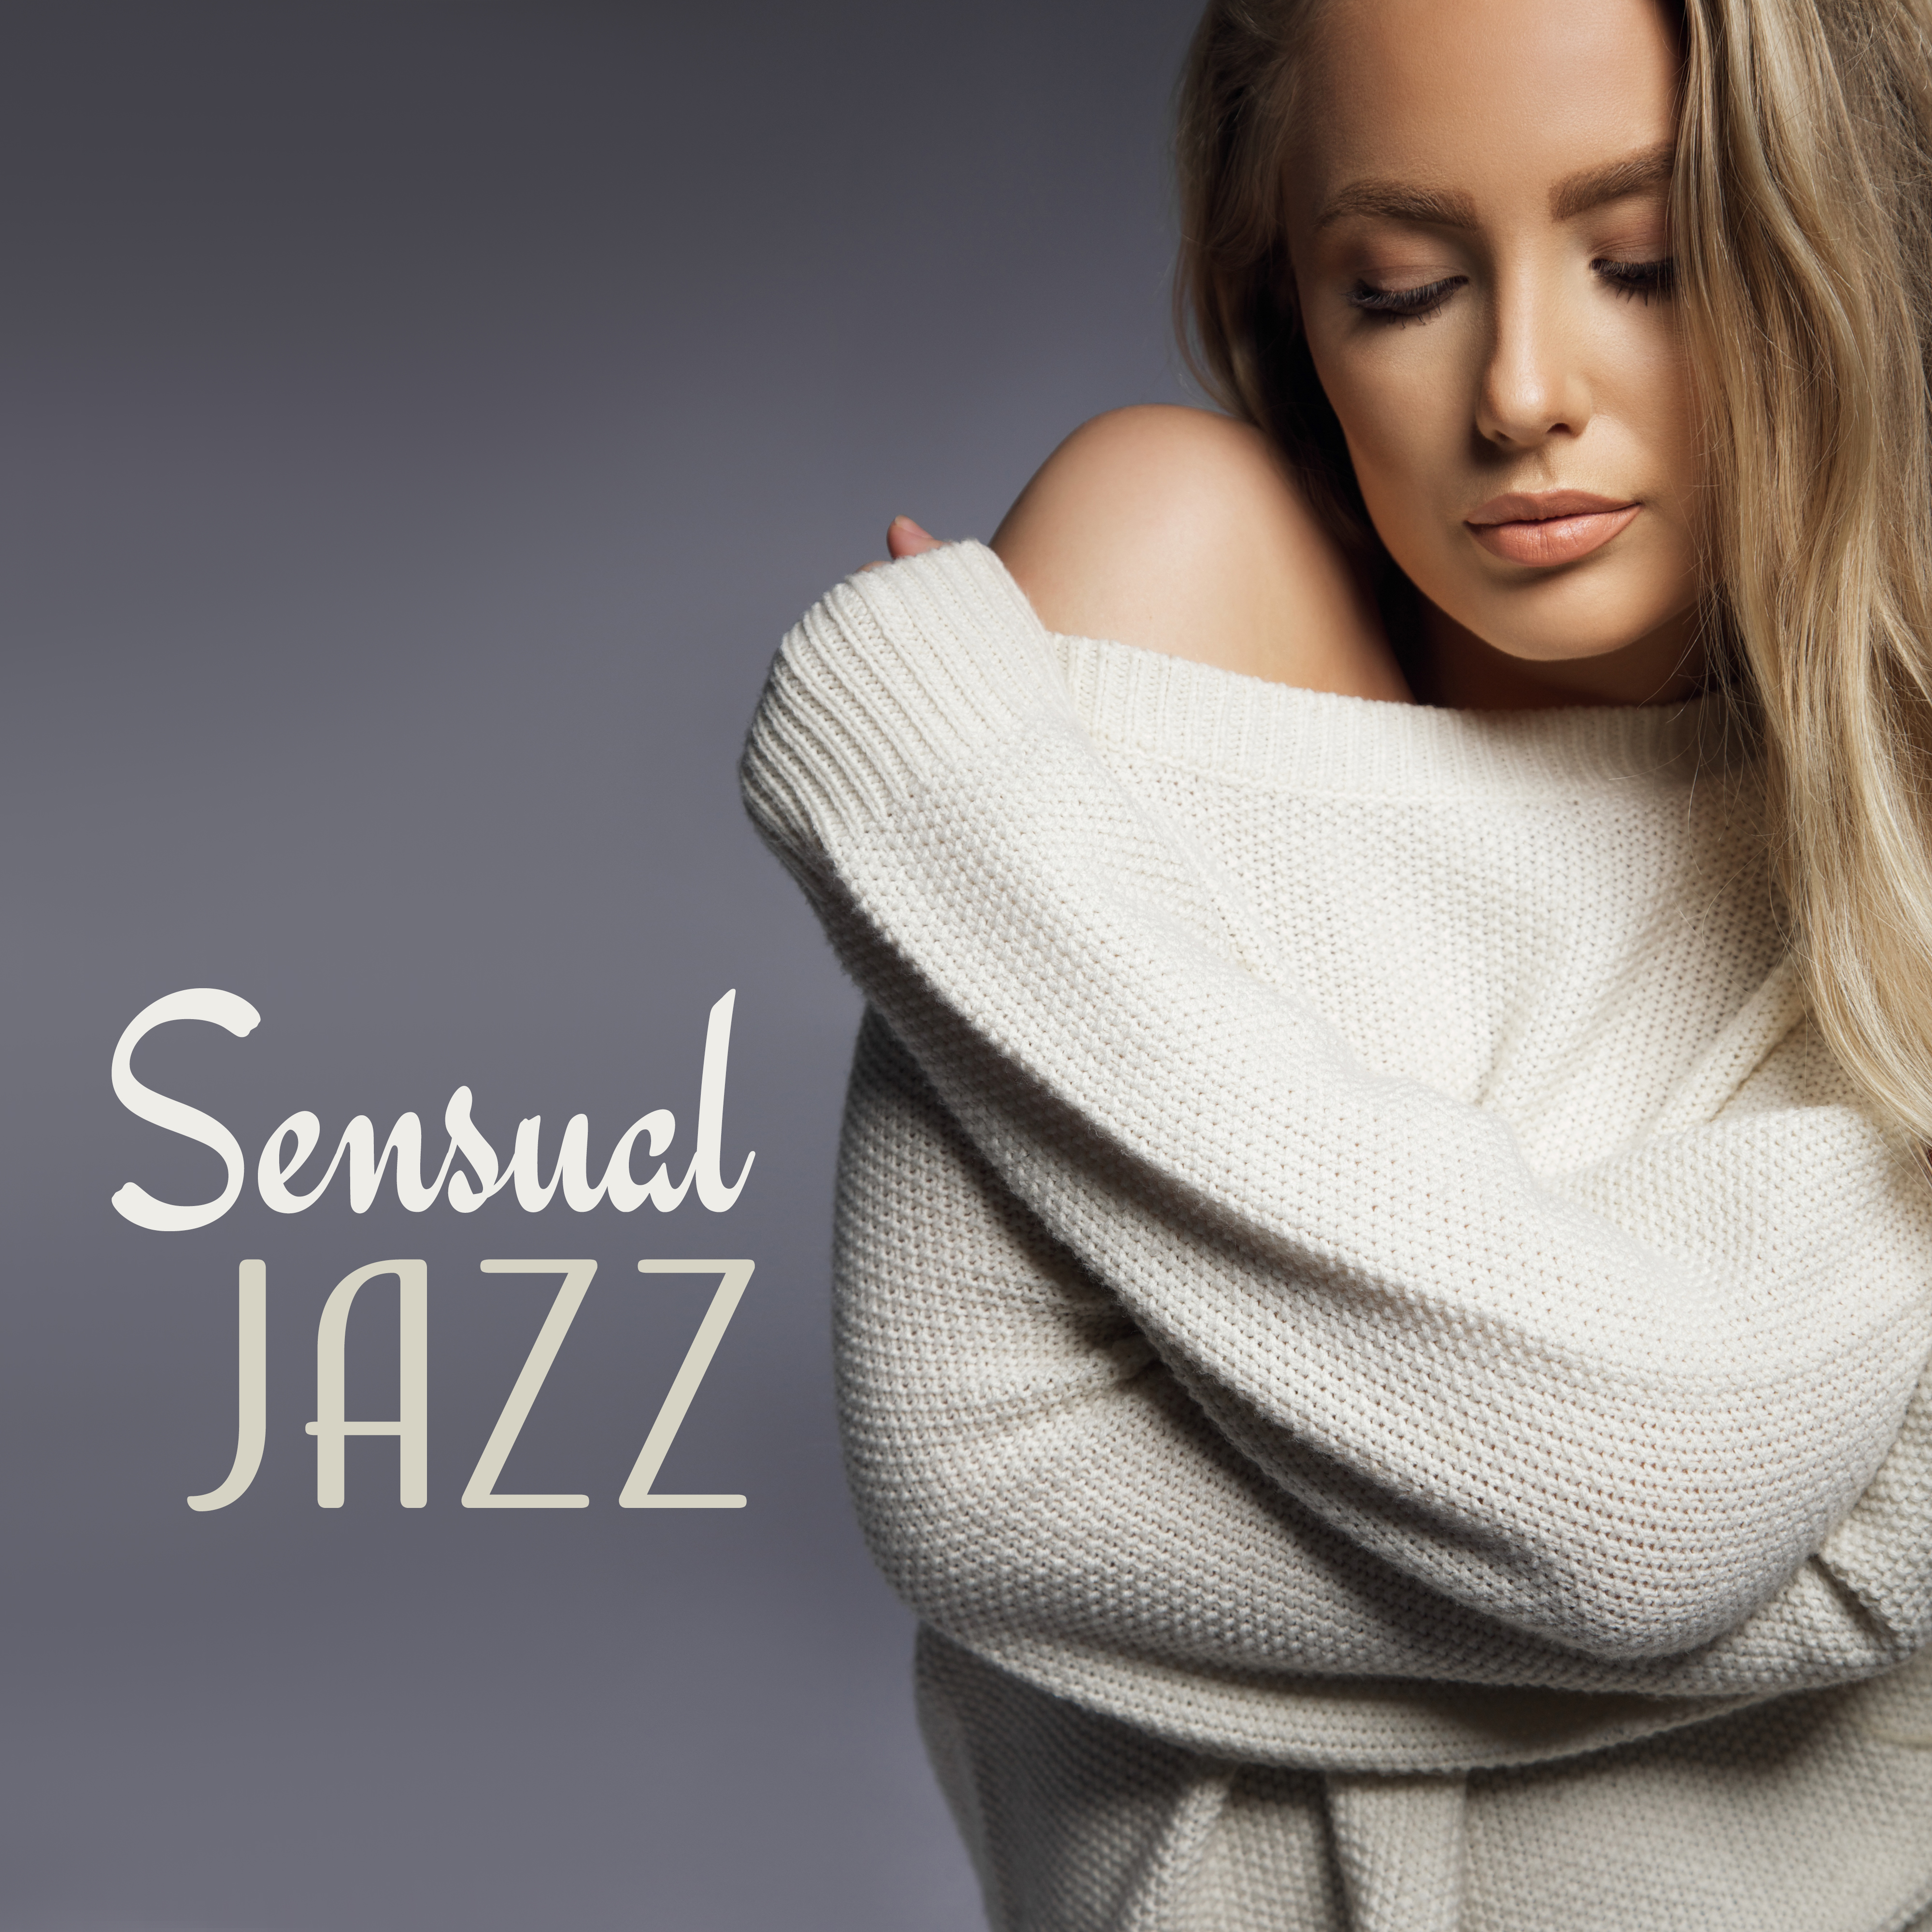 Sensual Jazz  Music, Erotic Dance, Fancy Games, Smooth Jazz for Two, Chilled Time